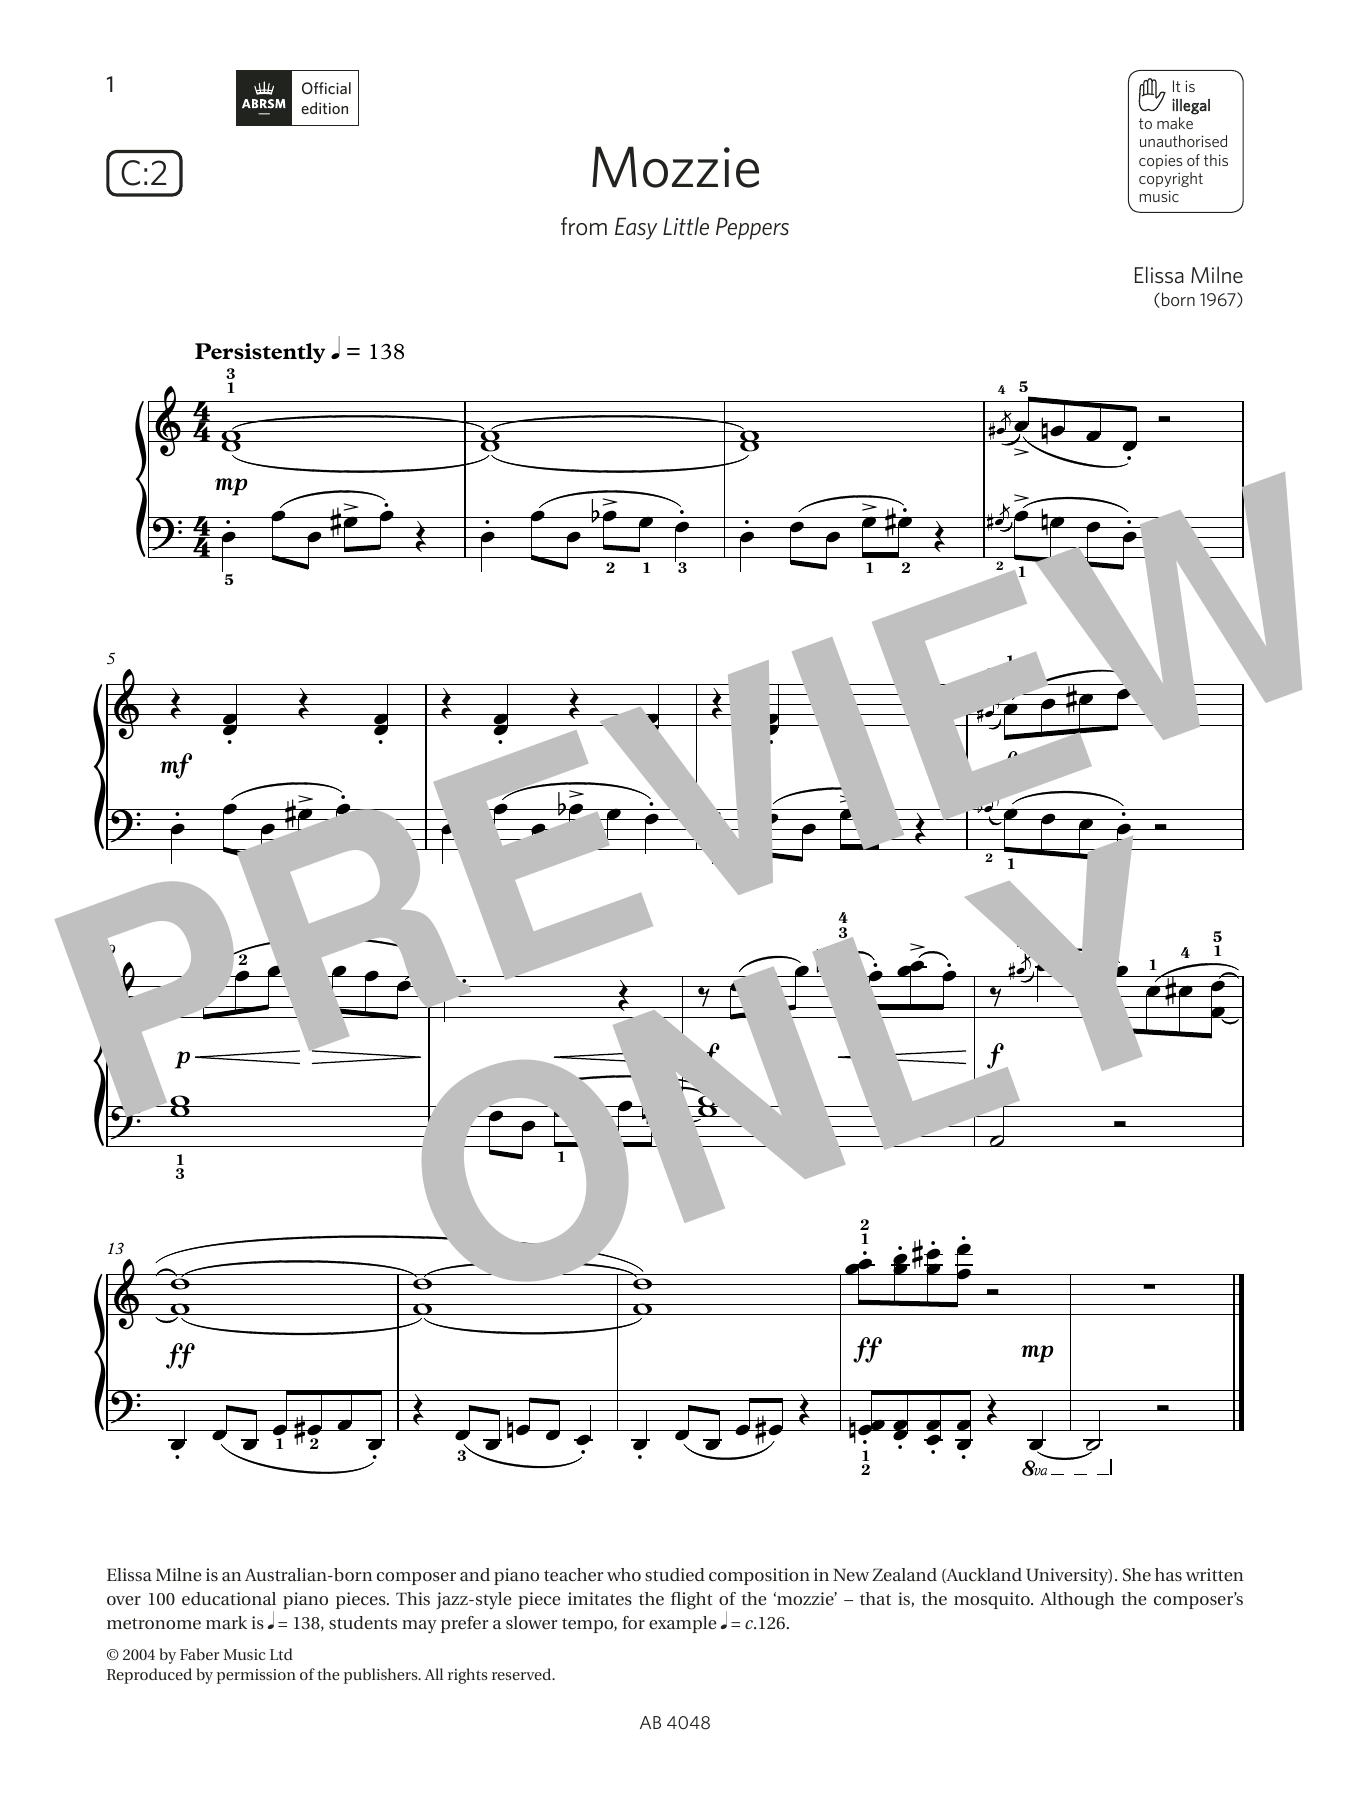 Download Elissa Milne Mozzie (Grade 2, list C2, from the ABRS Sheet Music